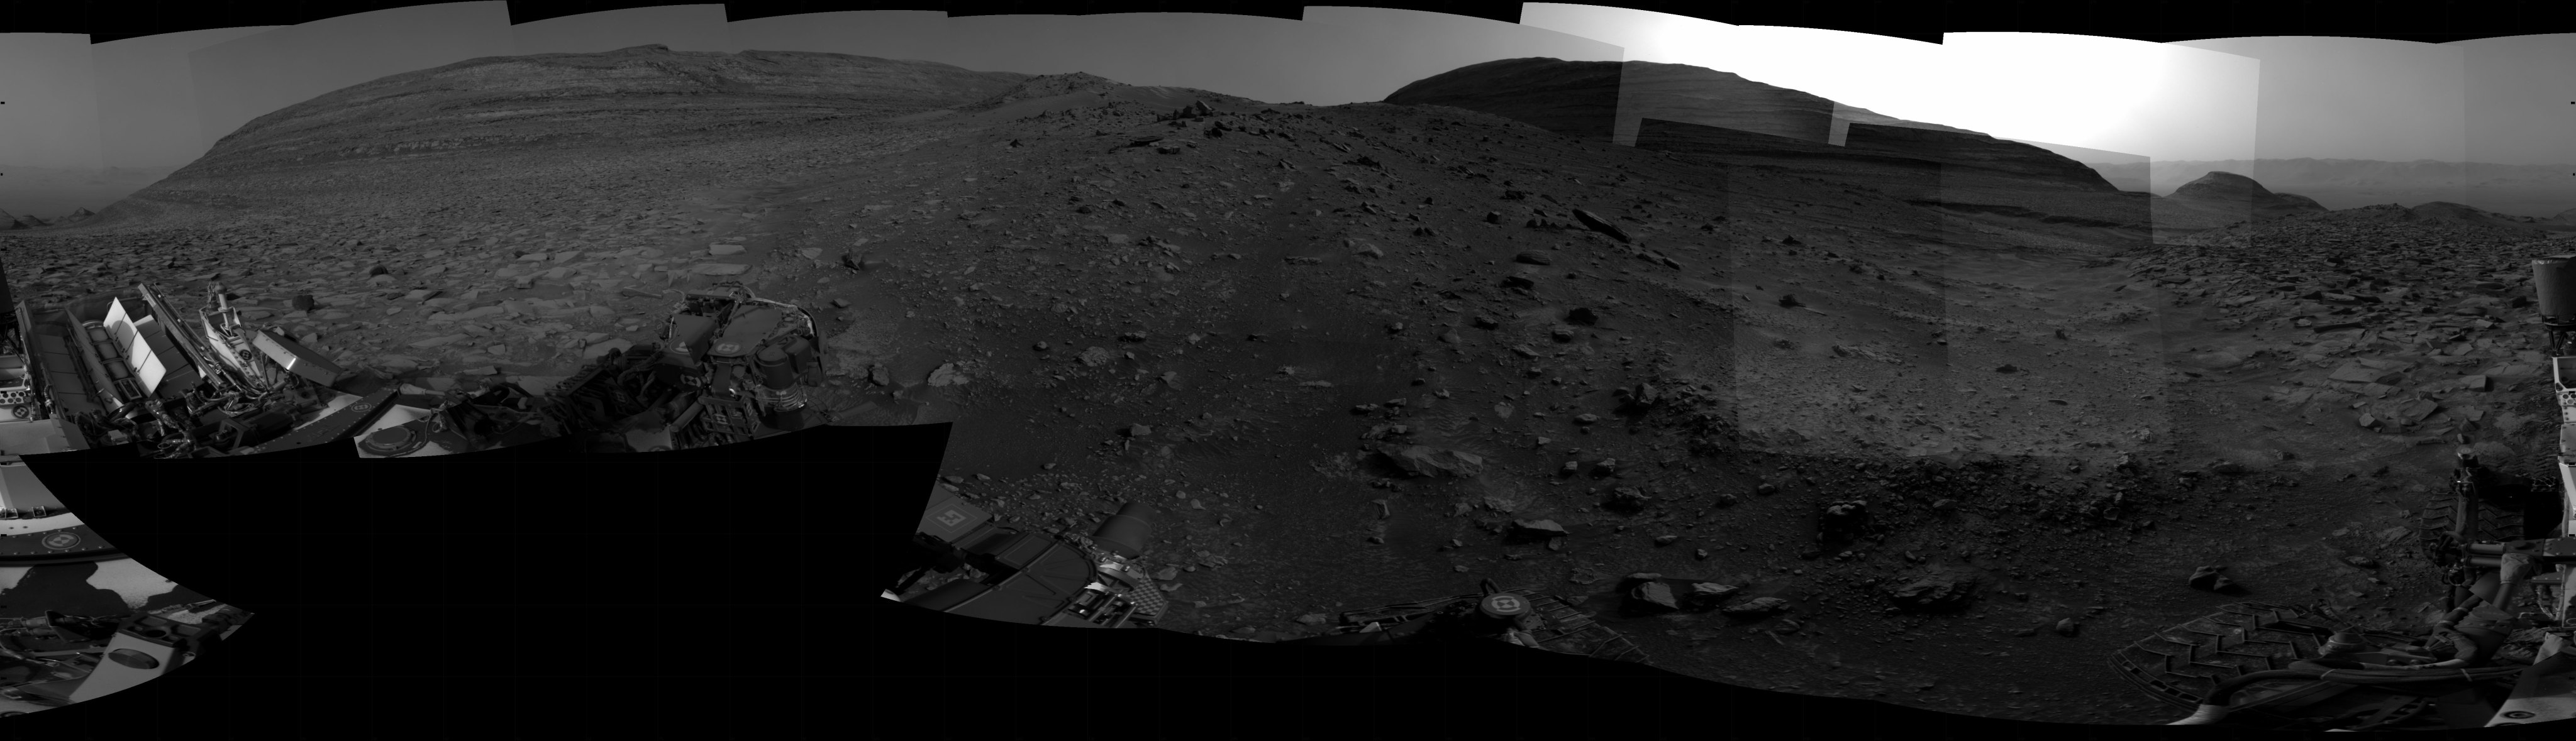 Curiosity took the images on May 21, 2024, Sol 4191 of the Mars Science Laboratory mission at drive 1952, site number 107. The local mean solar time for the image exposures was from 3 PM to 4 PM.